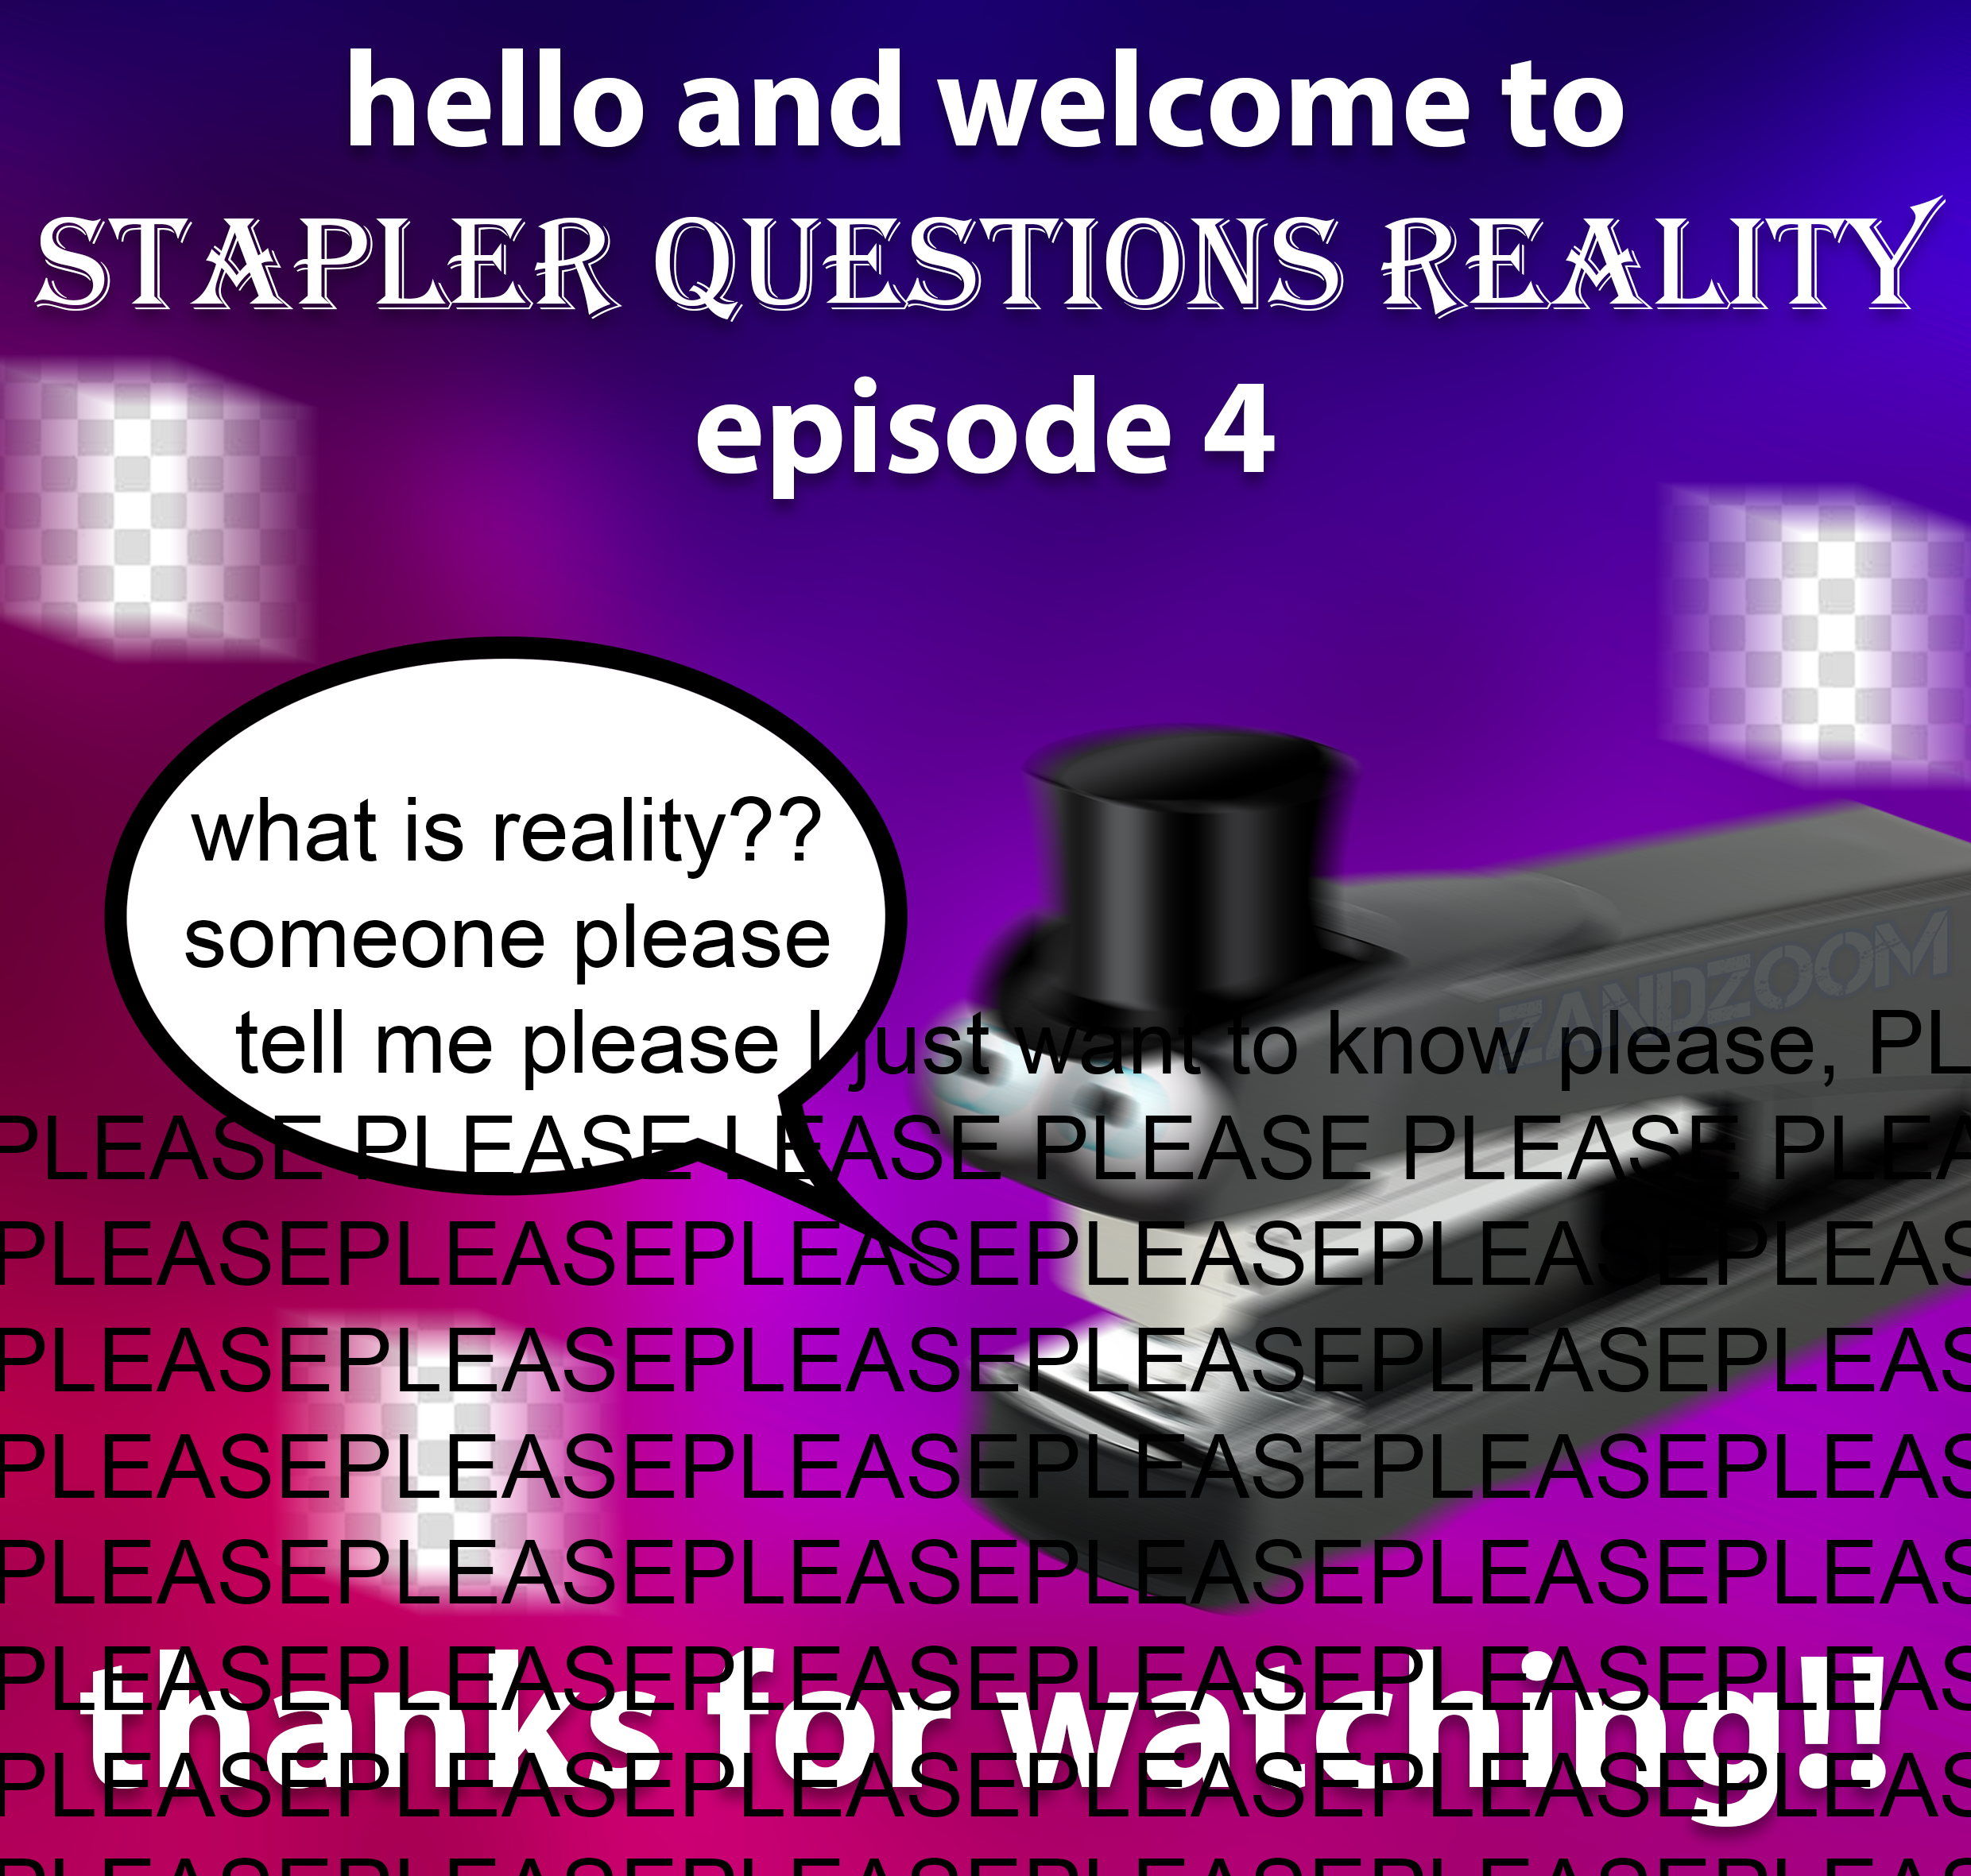 hello and welcome to Stapler Questions Reality episode 4 what is reality?? someone please tell me please ust want to know please, Pl Pleastpleasellase Please Please Ple Pleasepleasepleasepleasepleapleas Pleasepleasepleaserleasepleasepleas…